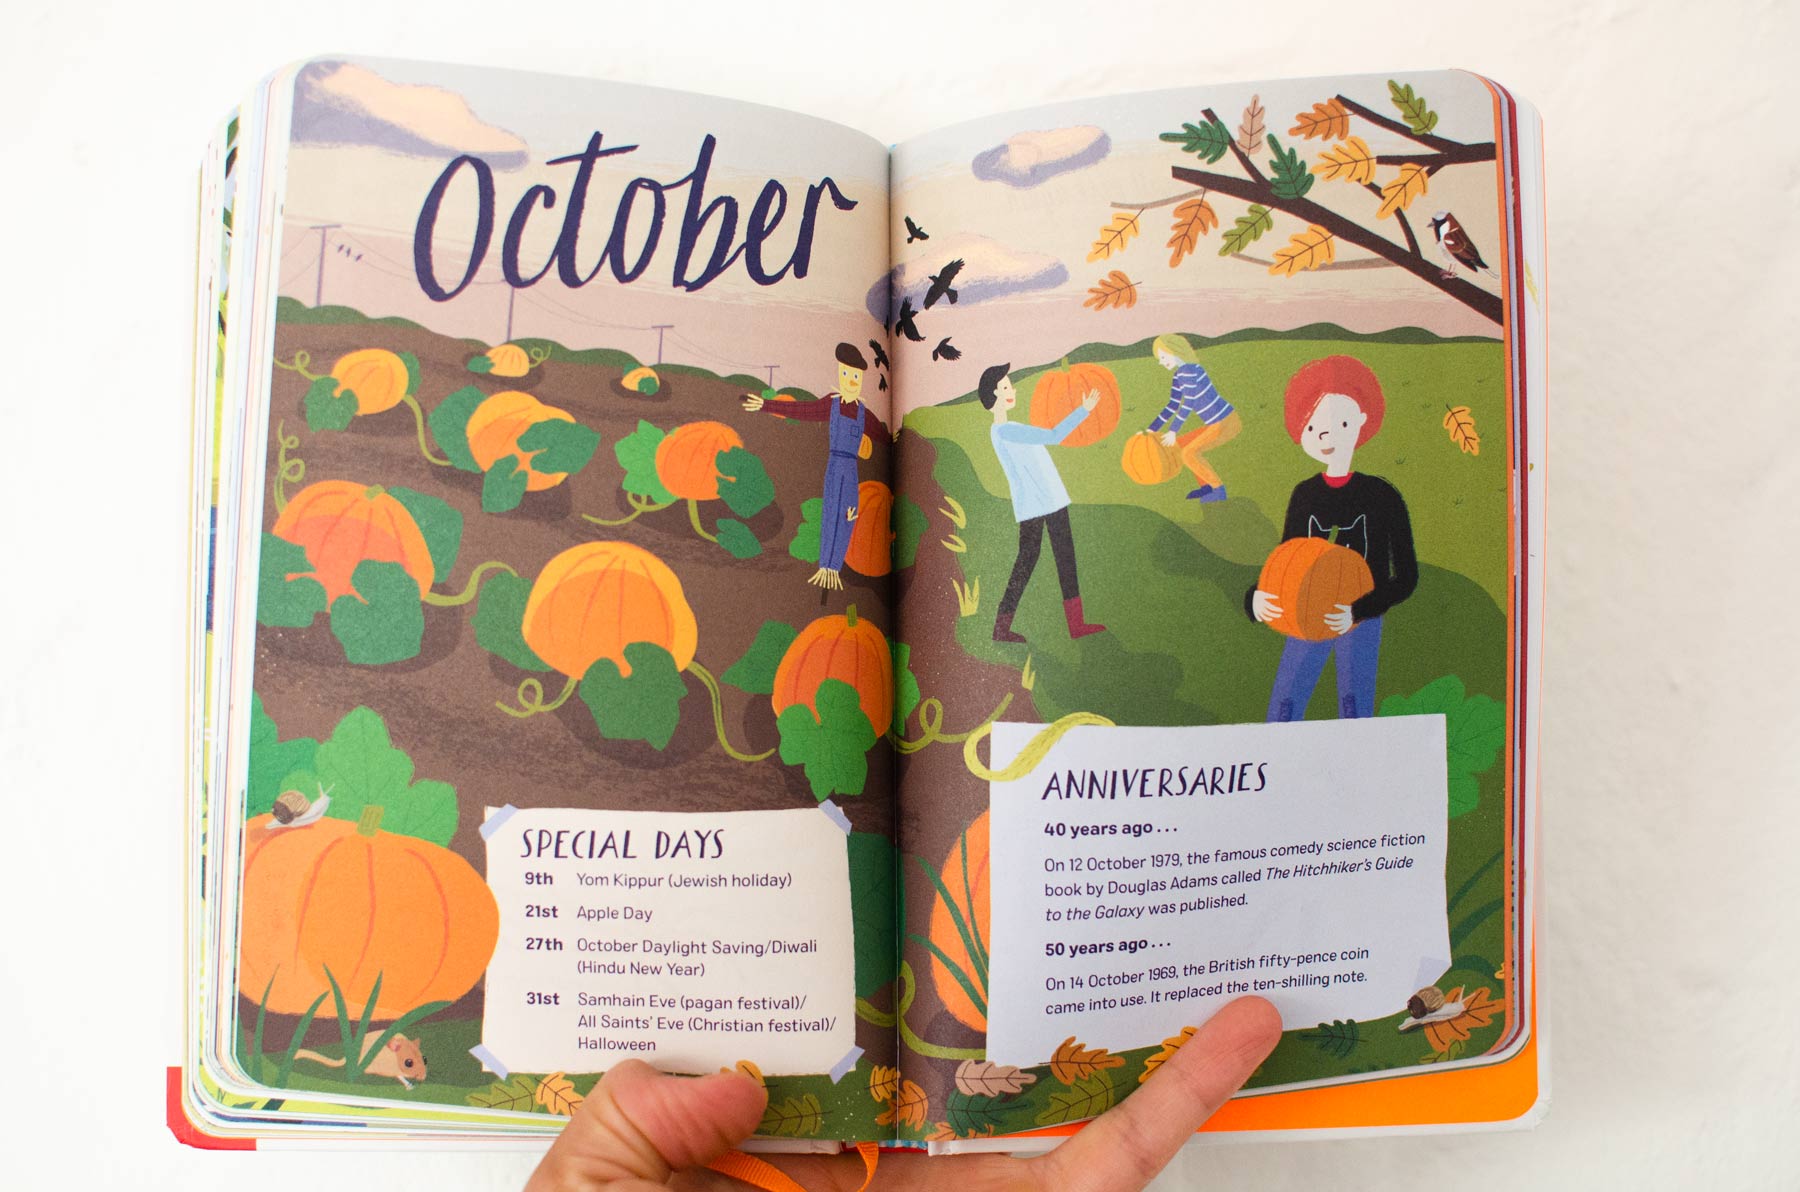 October Final Illustration for 2019: Nature Month by Month by Elly Jahnz